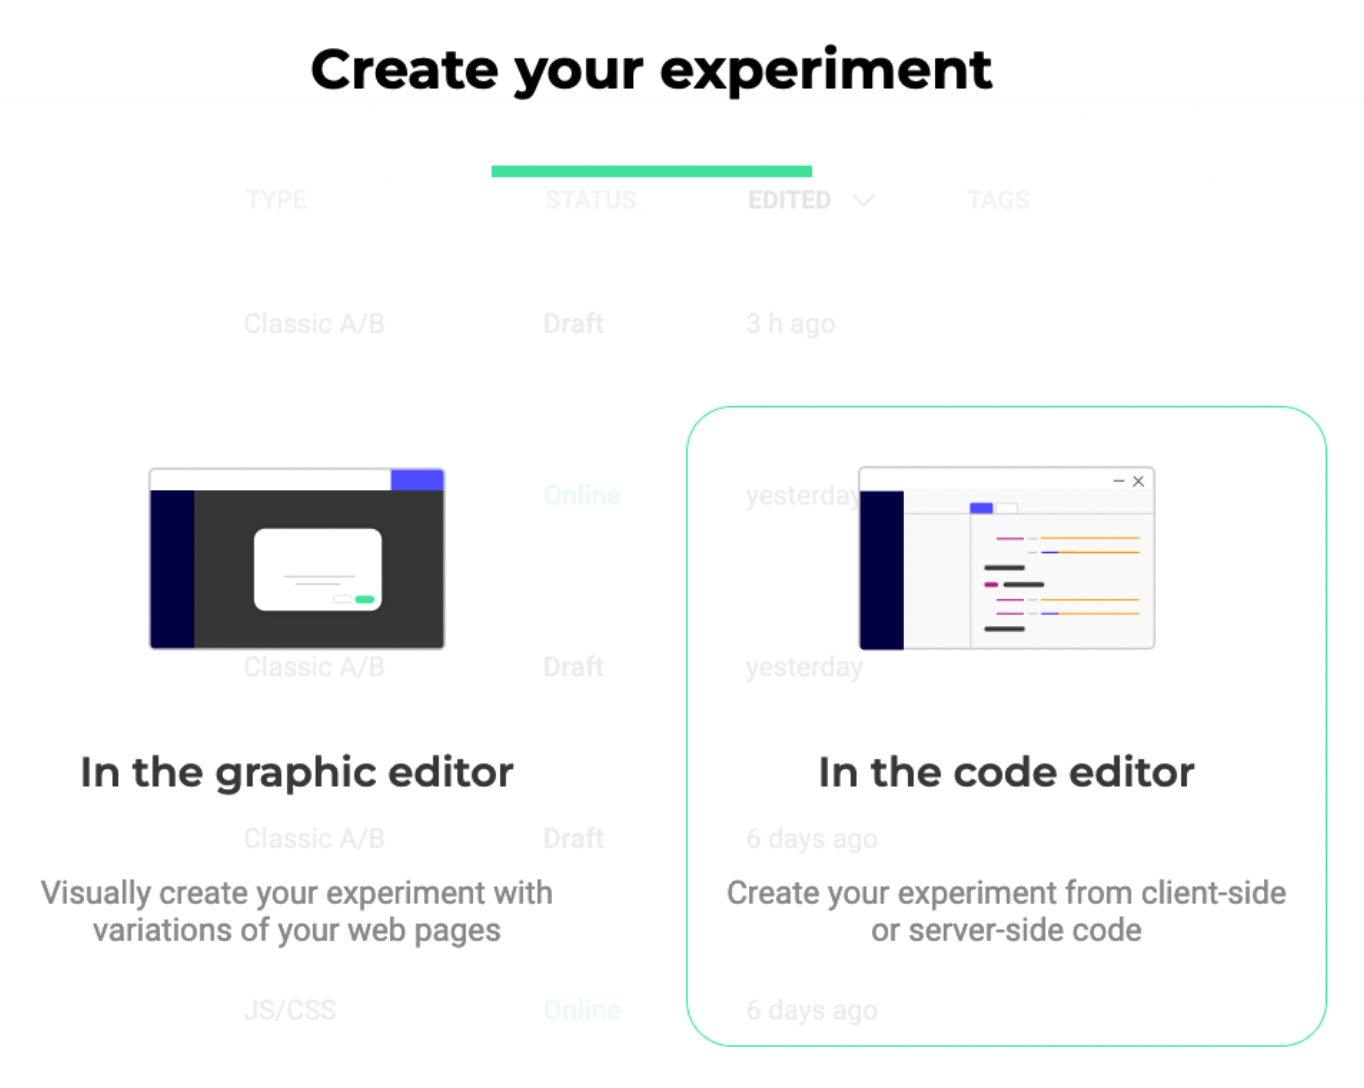 How to create new experiment